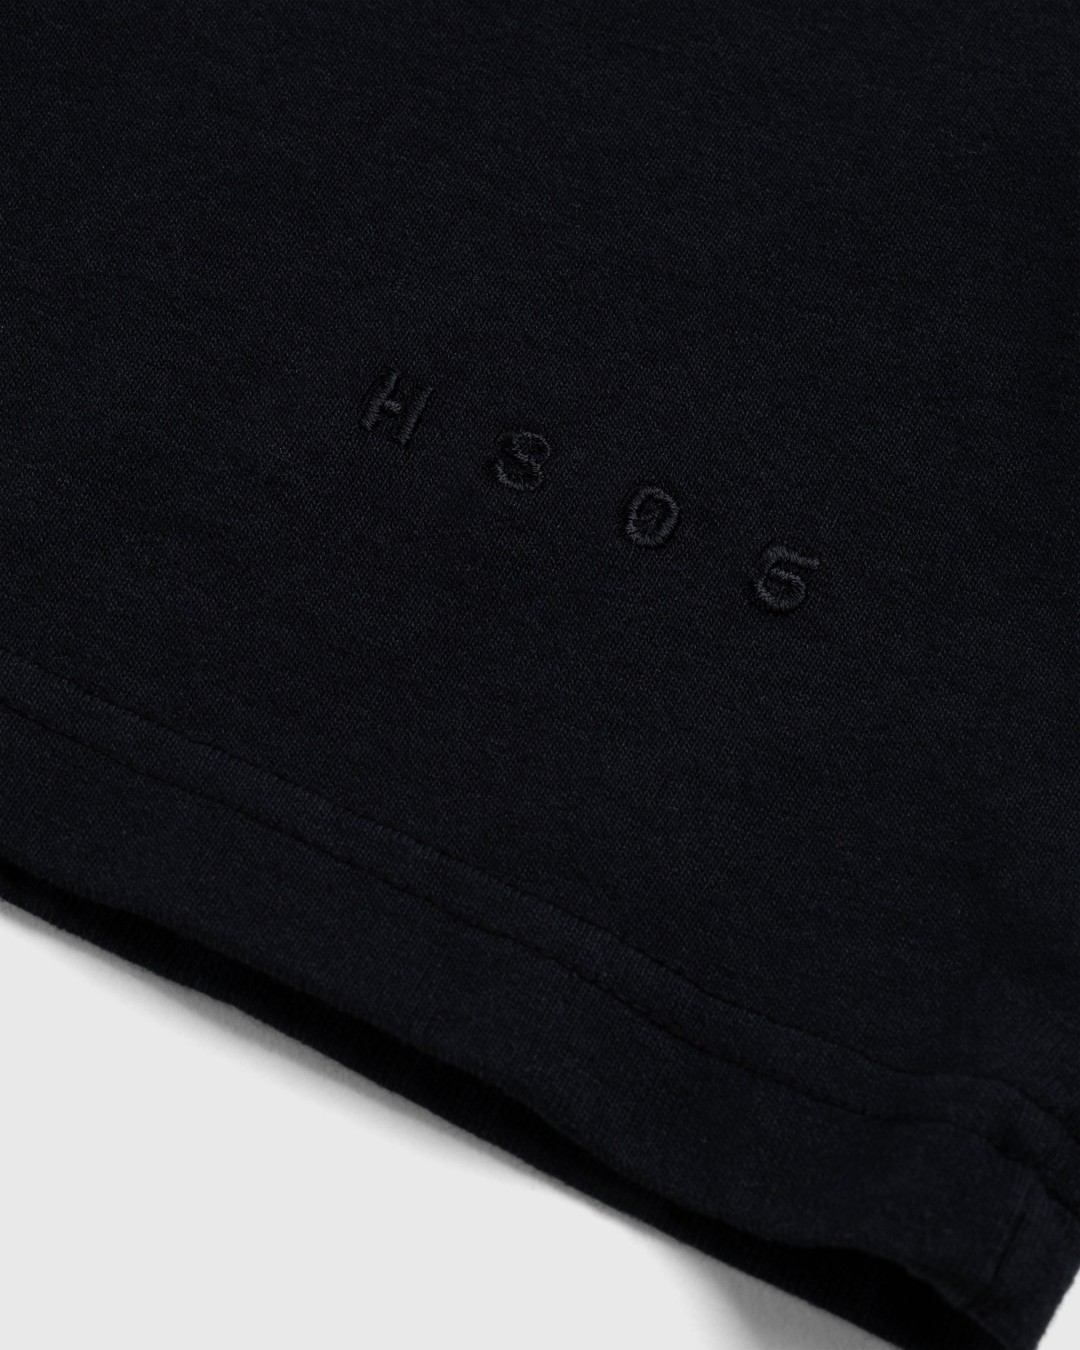 Highsnobiety HS05 – Pigment Dyed Boxy Long Sleeves Jersey Black - Longsleeves - Black - Image 7